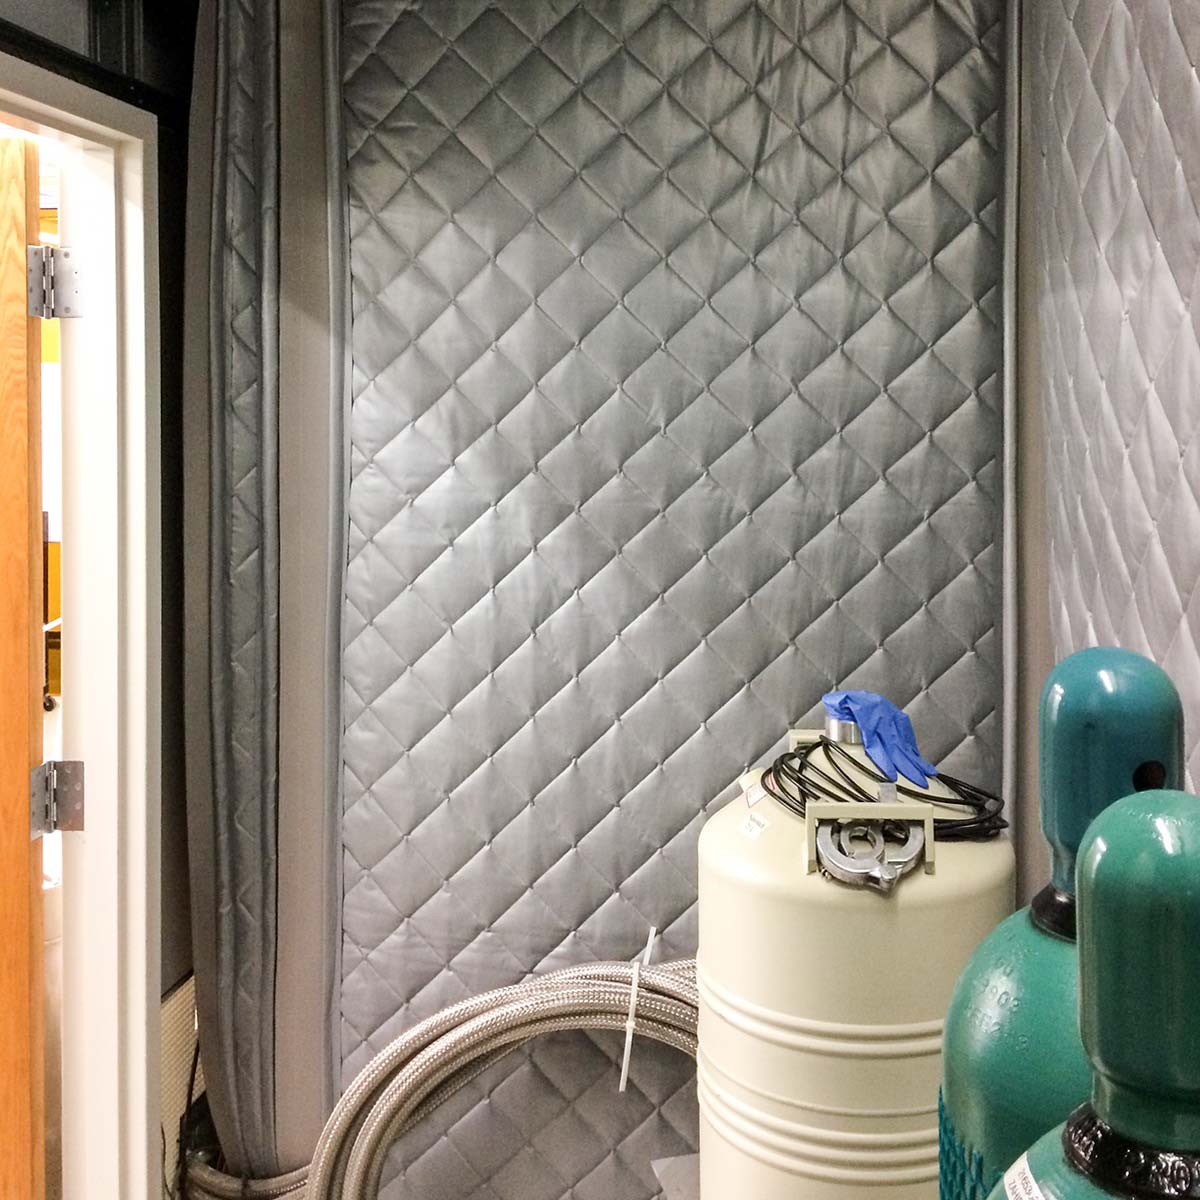 PrivacyShield® ABBC-13EXT Exterior Barrier Backed Soundproofing Blanket -  Acoustical Solutions